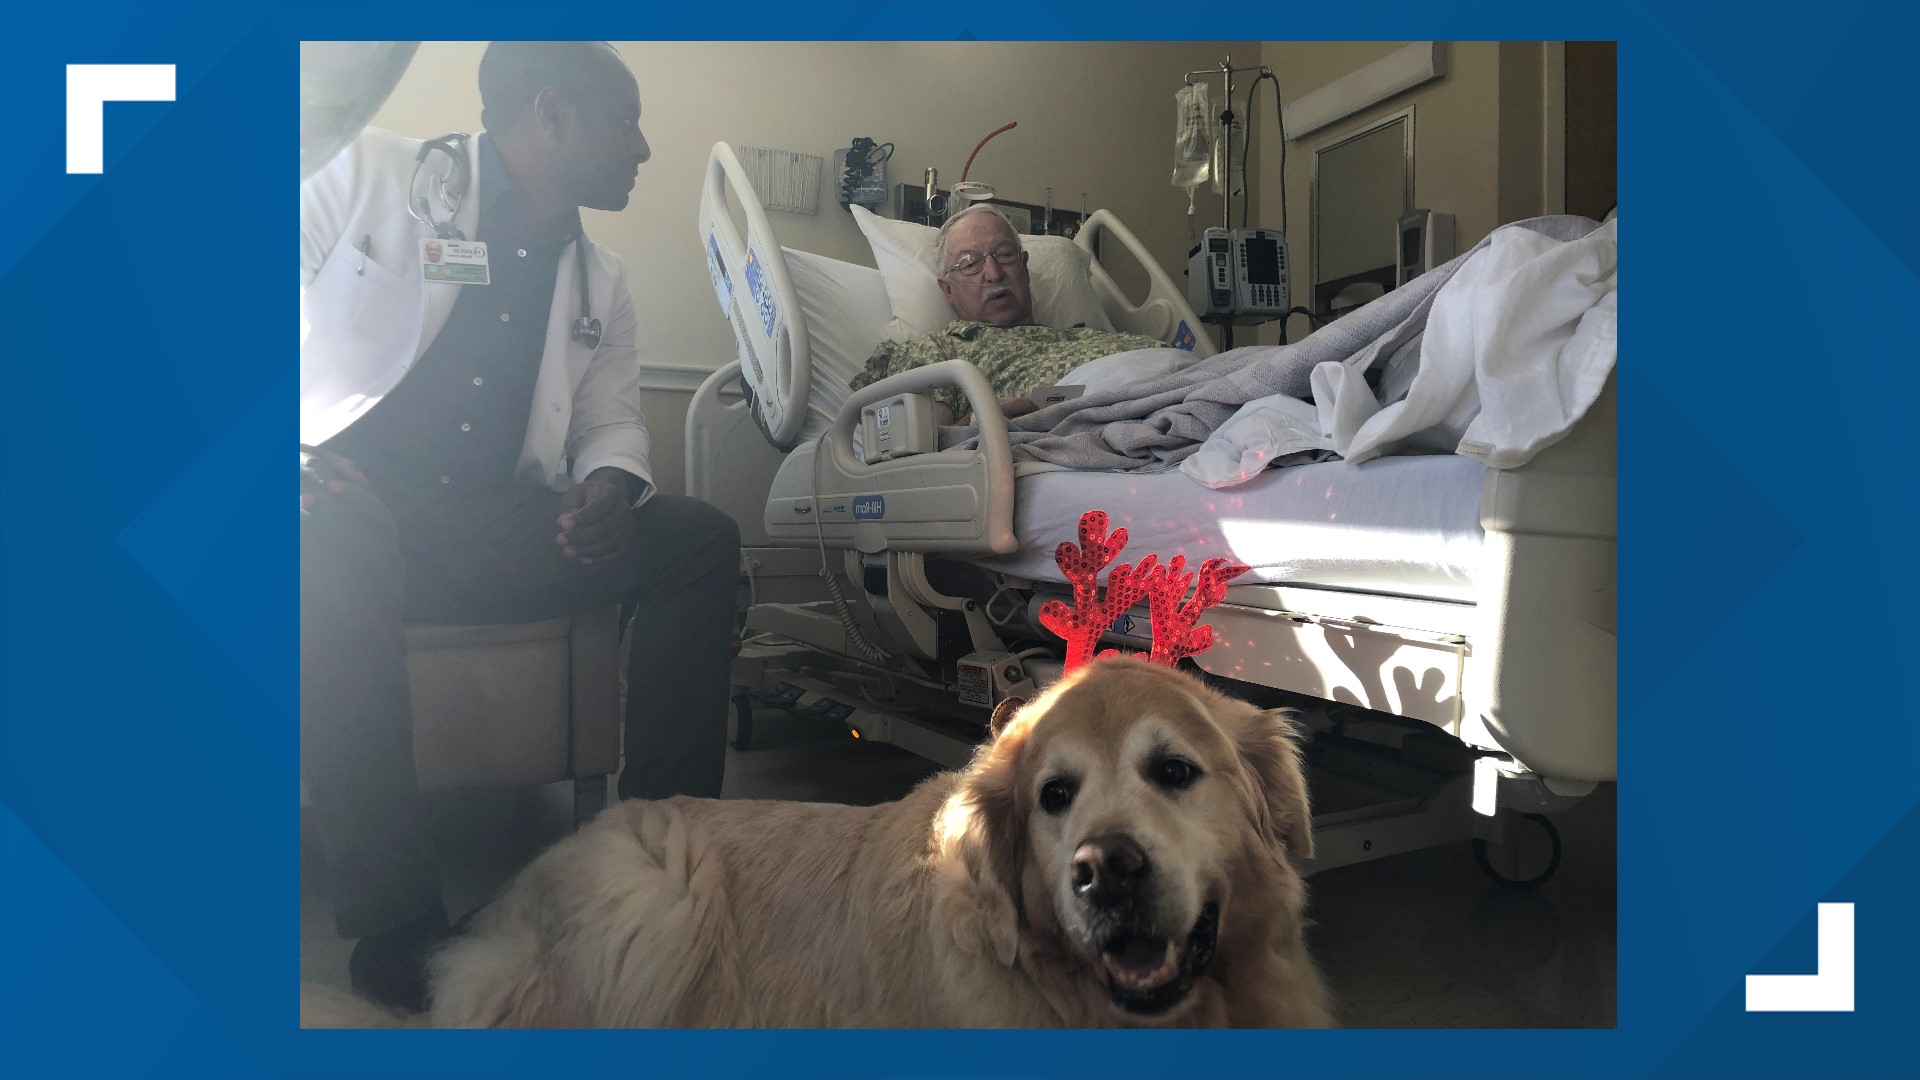 Kiyyaa is the newest certified therapy dog on the block at Coliseum Medical Centers, and his owner is a doctor at the hospital.